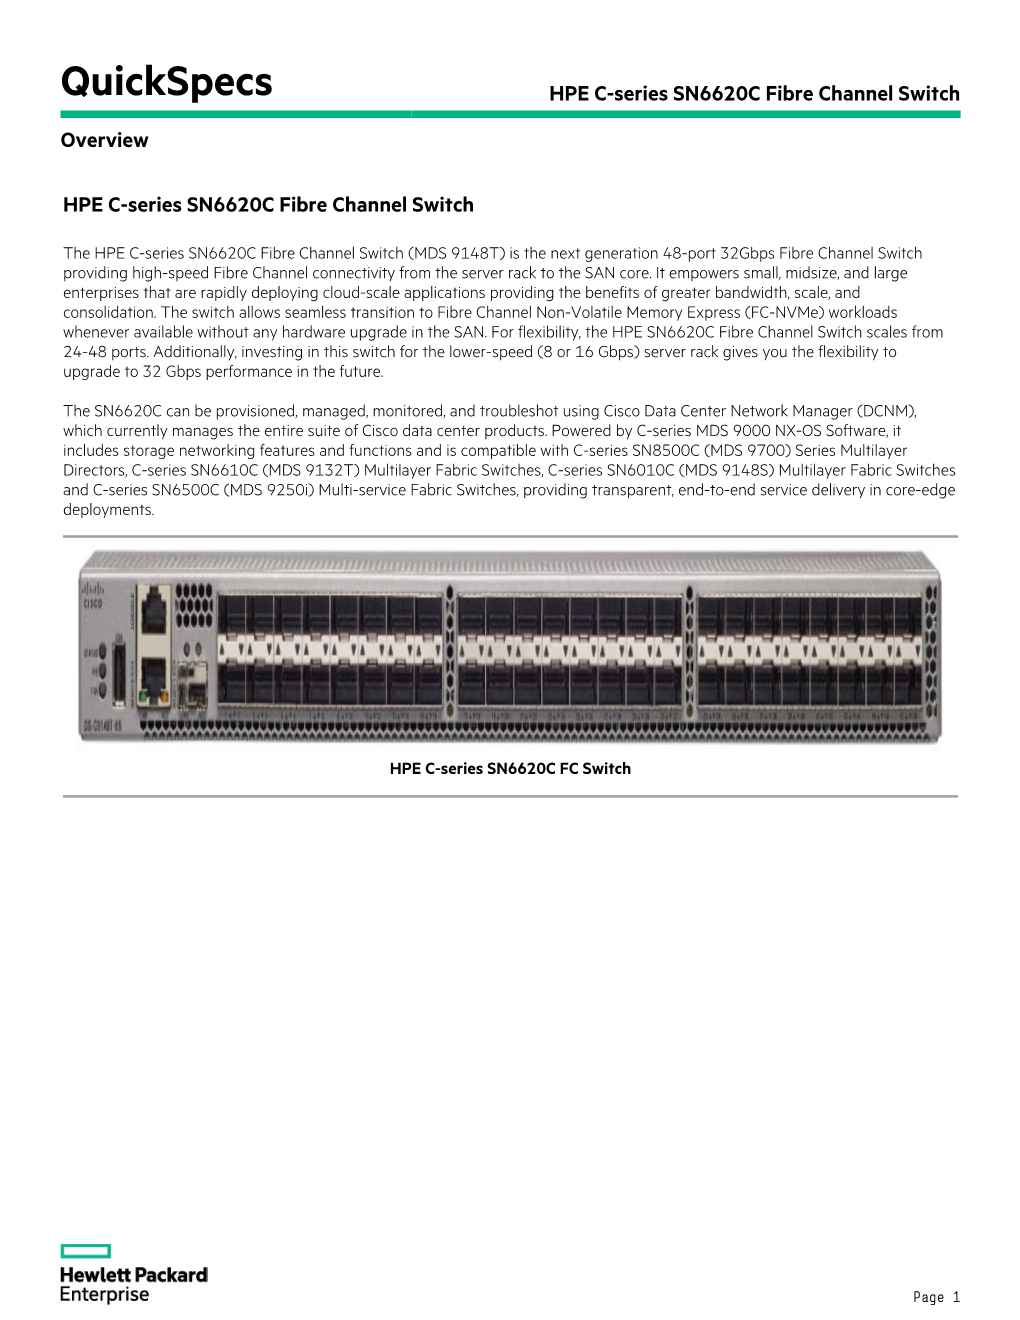 HPE C-Series SN6620C Fibre Channel Switch Overview